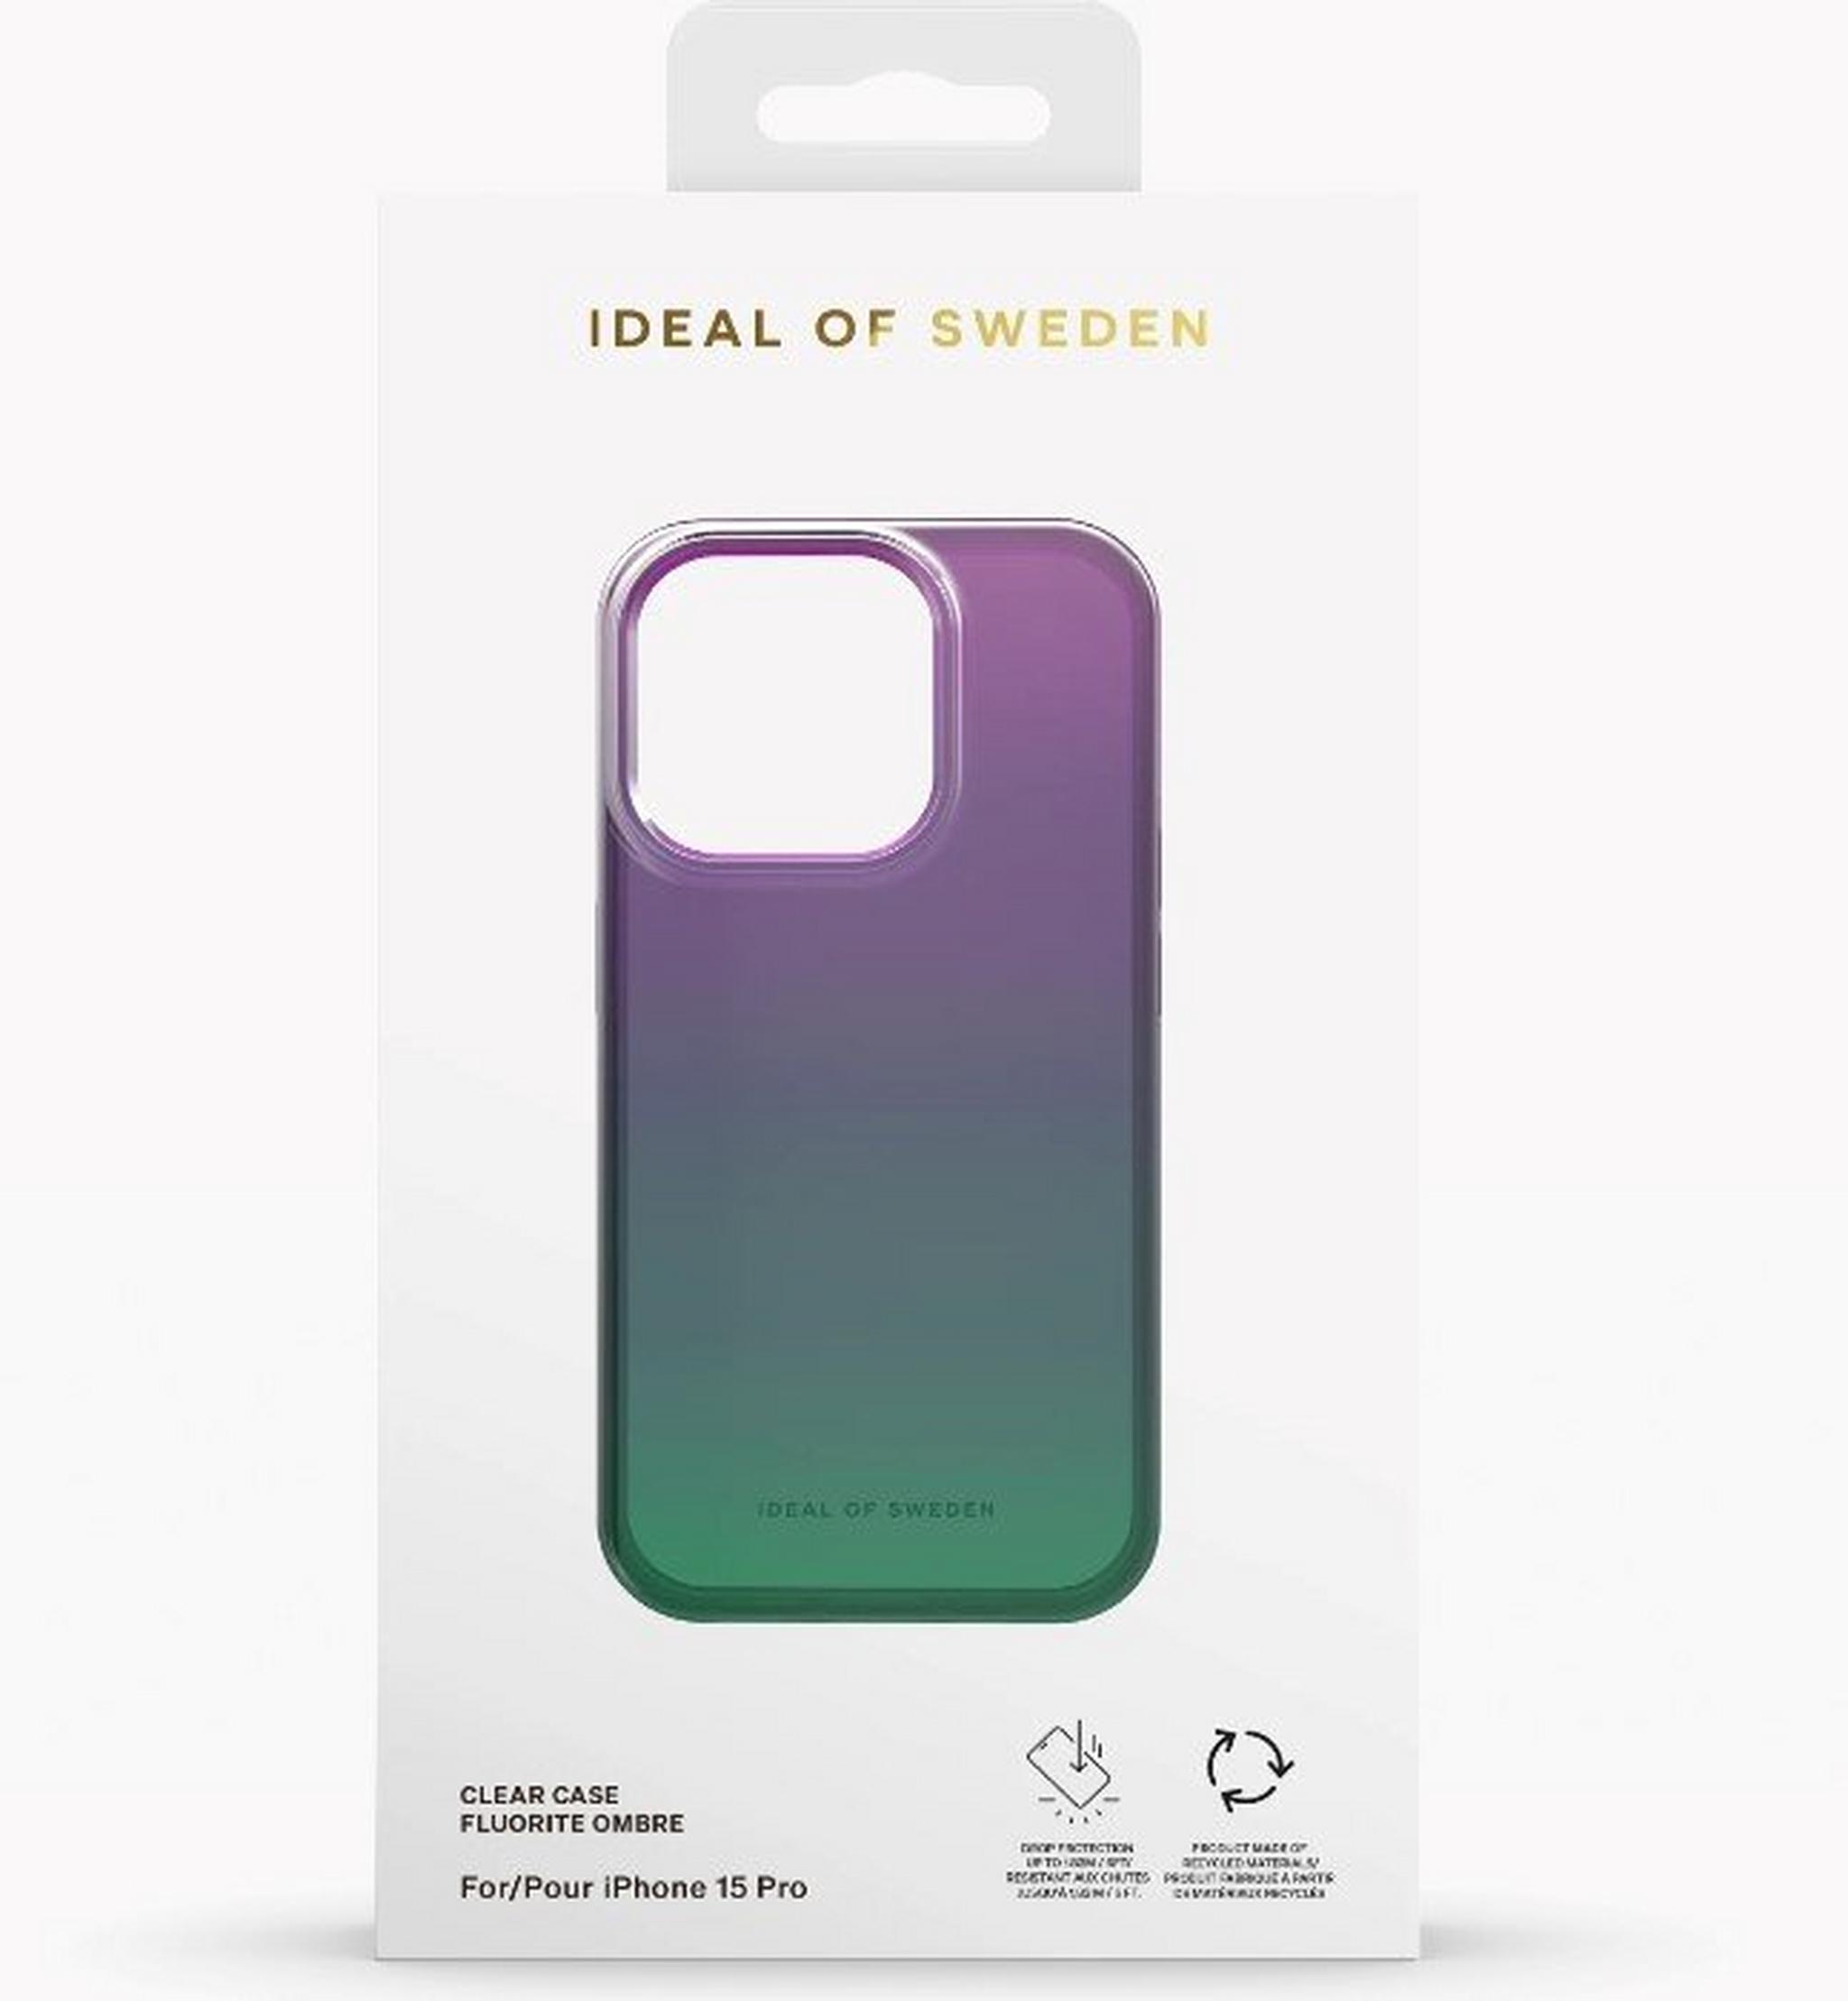 Ideal of Sweden Case for iPhone 15 Pro – Fluorite Ombre